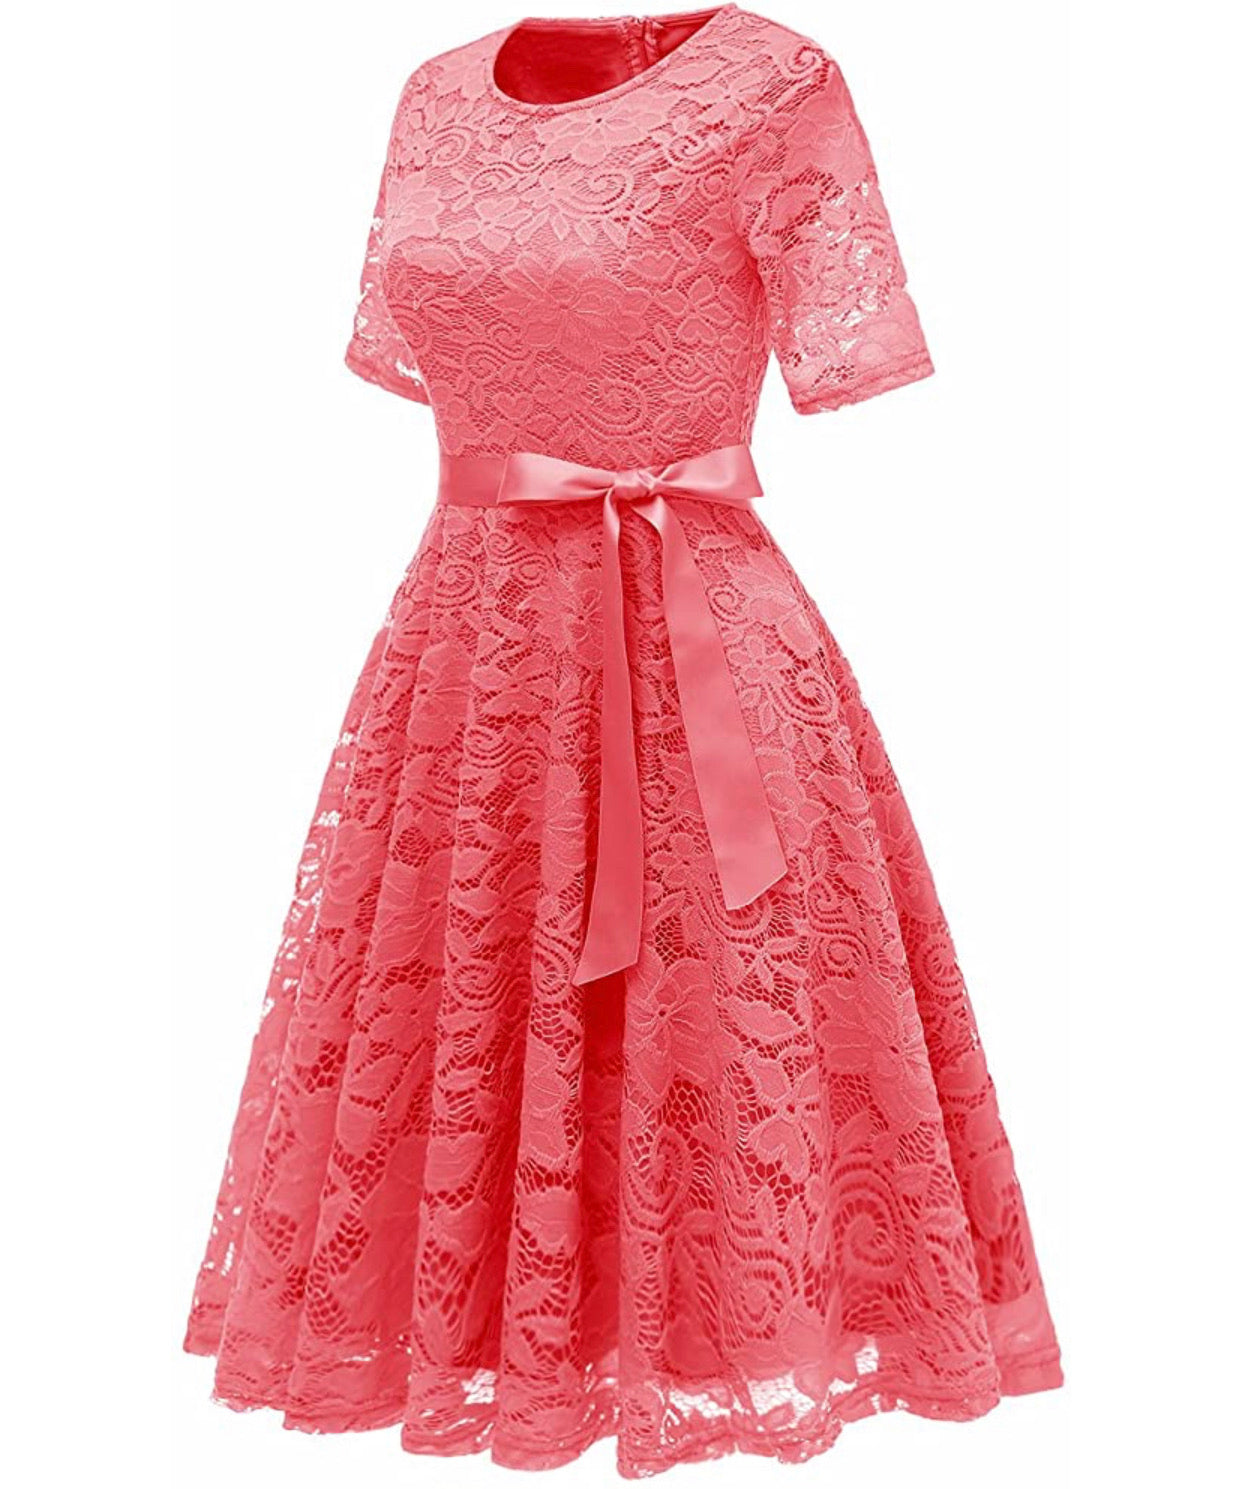 Vintage Inspired Full Lace Cocktail Dress, Sizes Small - 3XLarge (Coral)